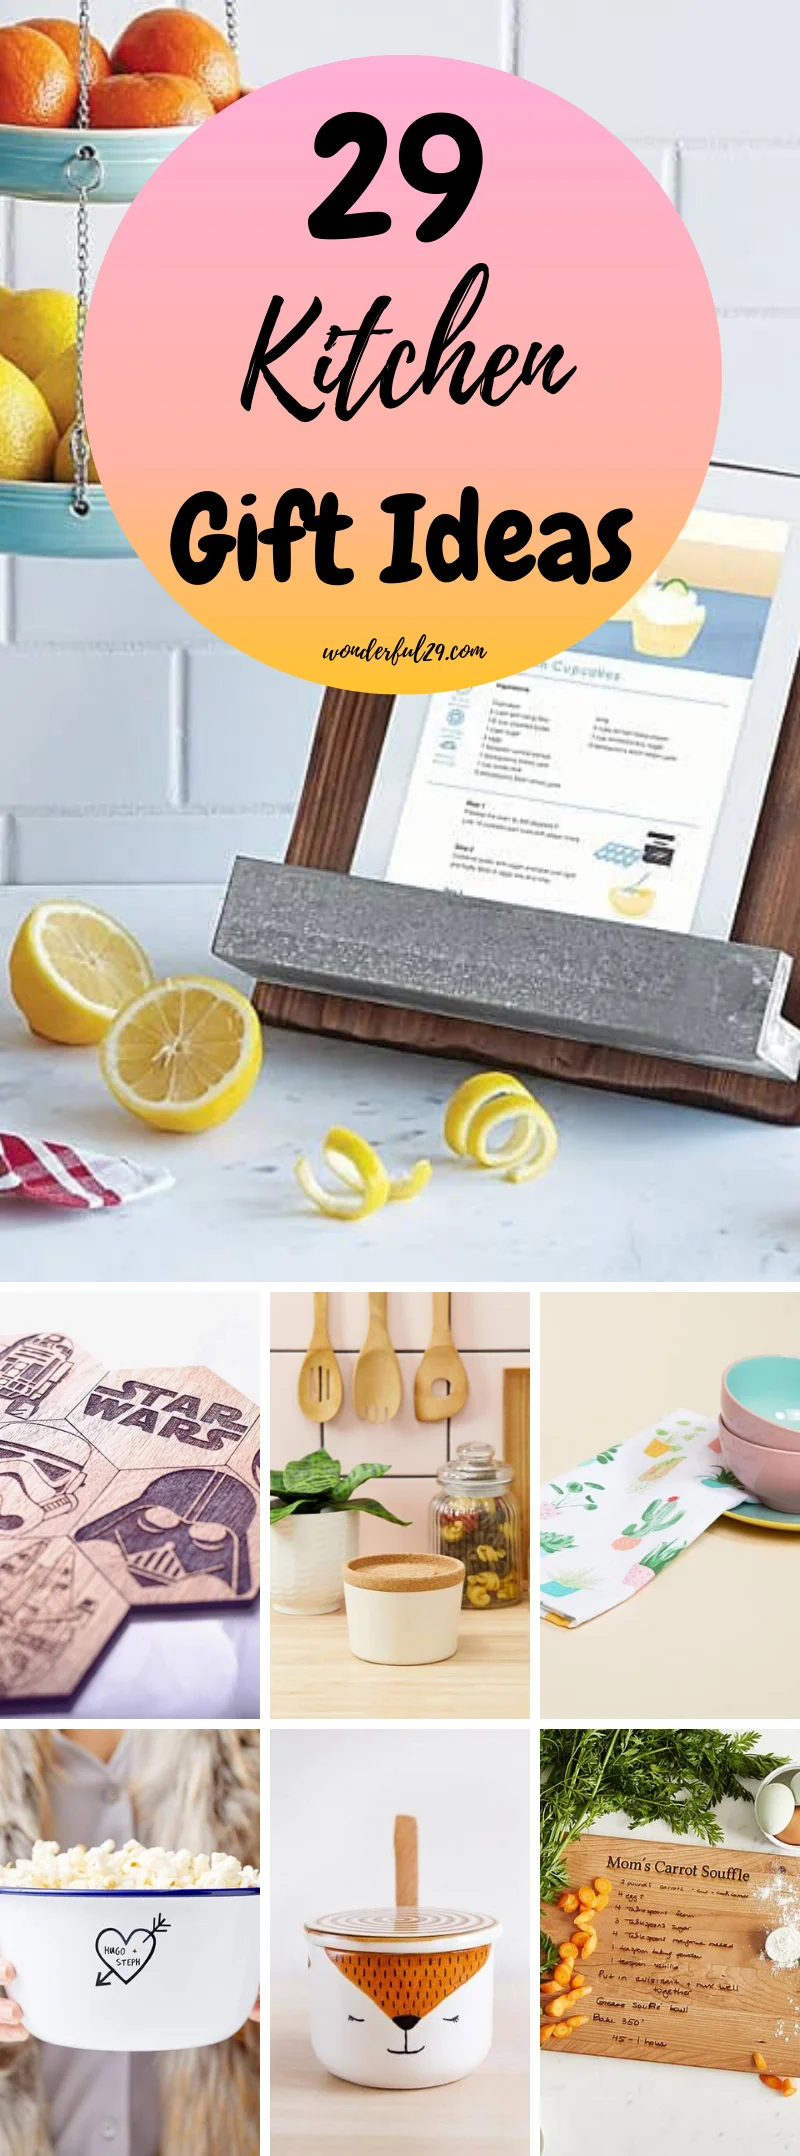 Kitchen Gift Ideas 2015: 7 Presents for People Who Like Food and Drink |  Glamour